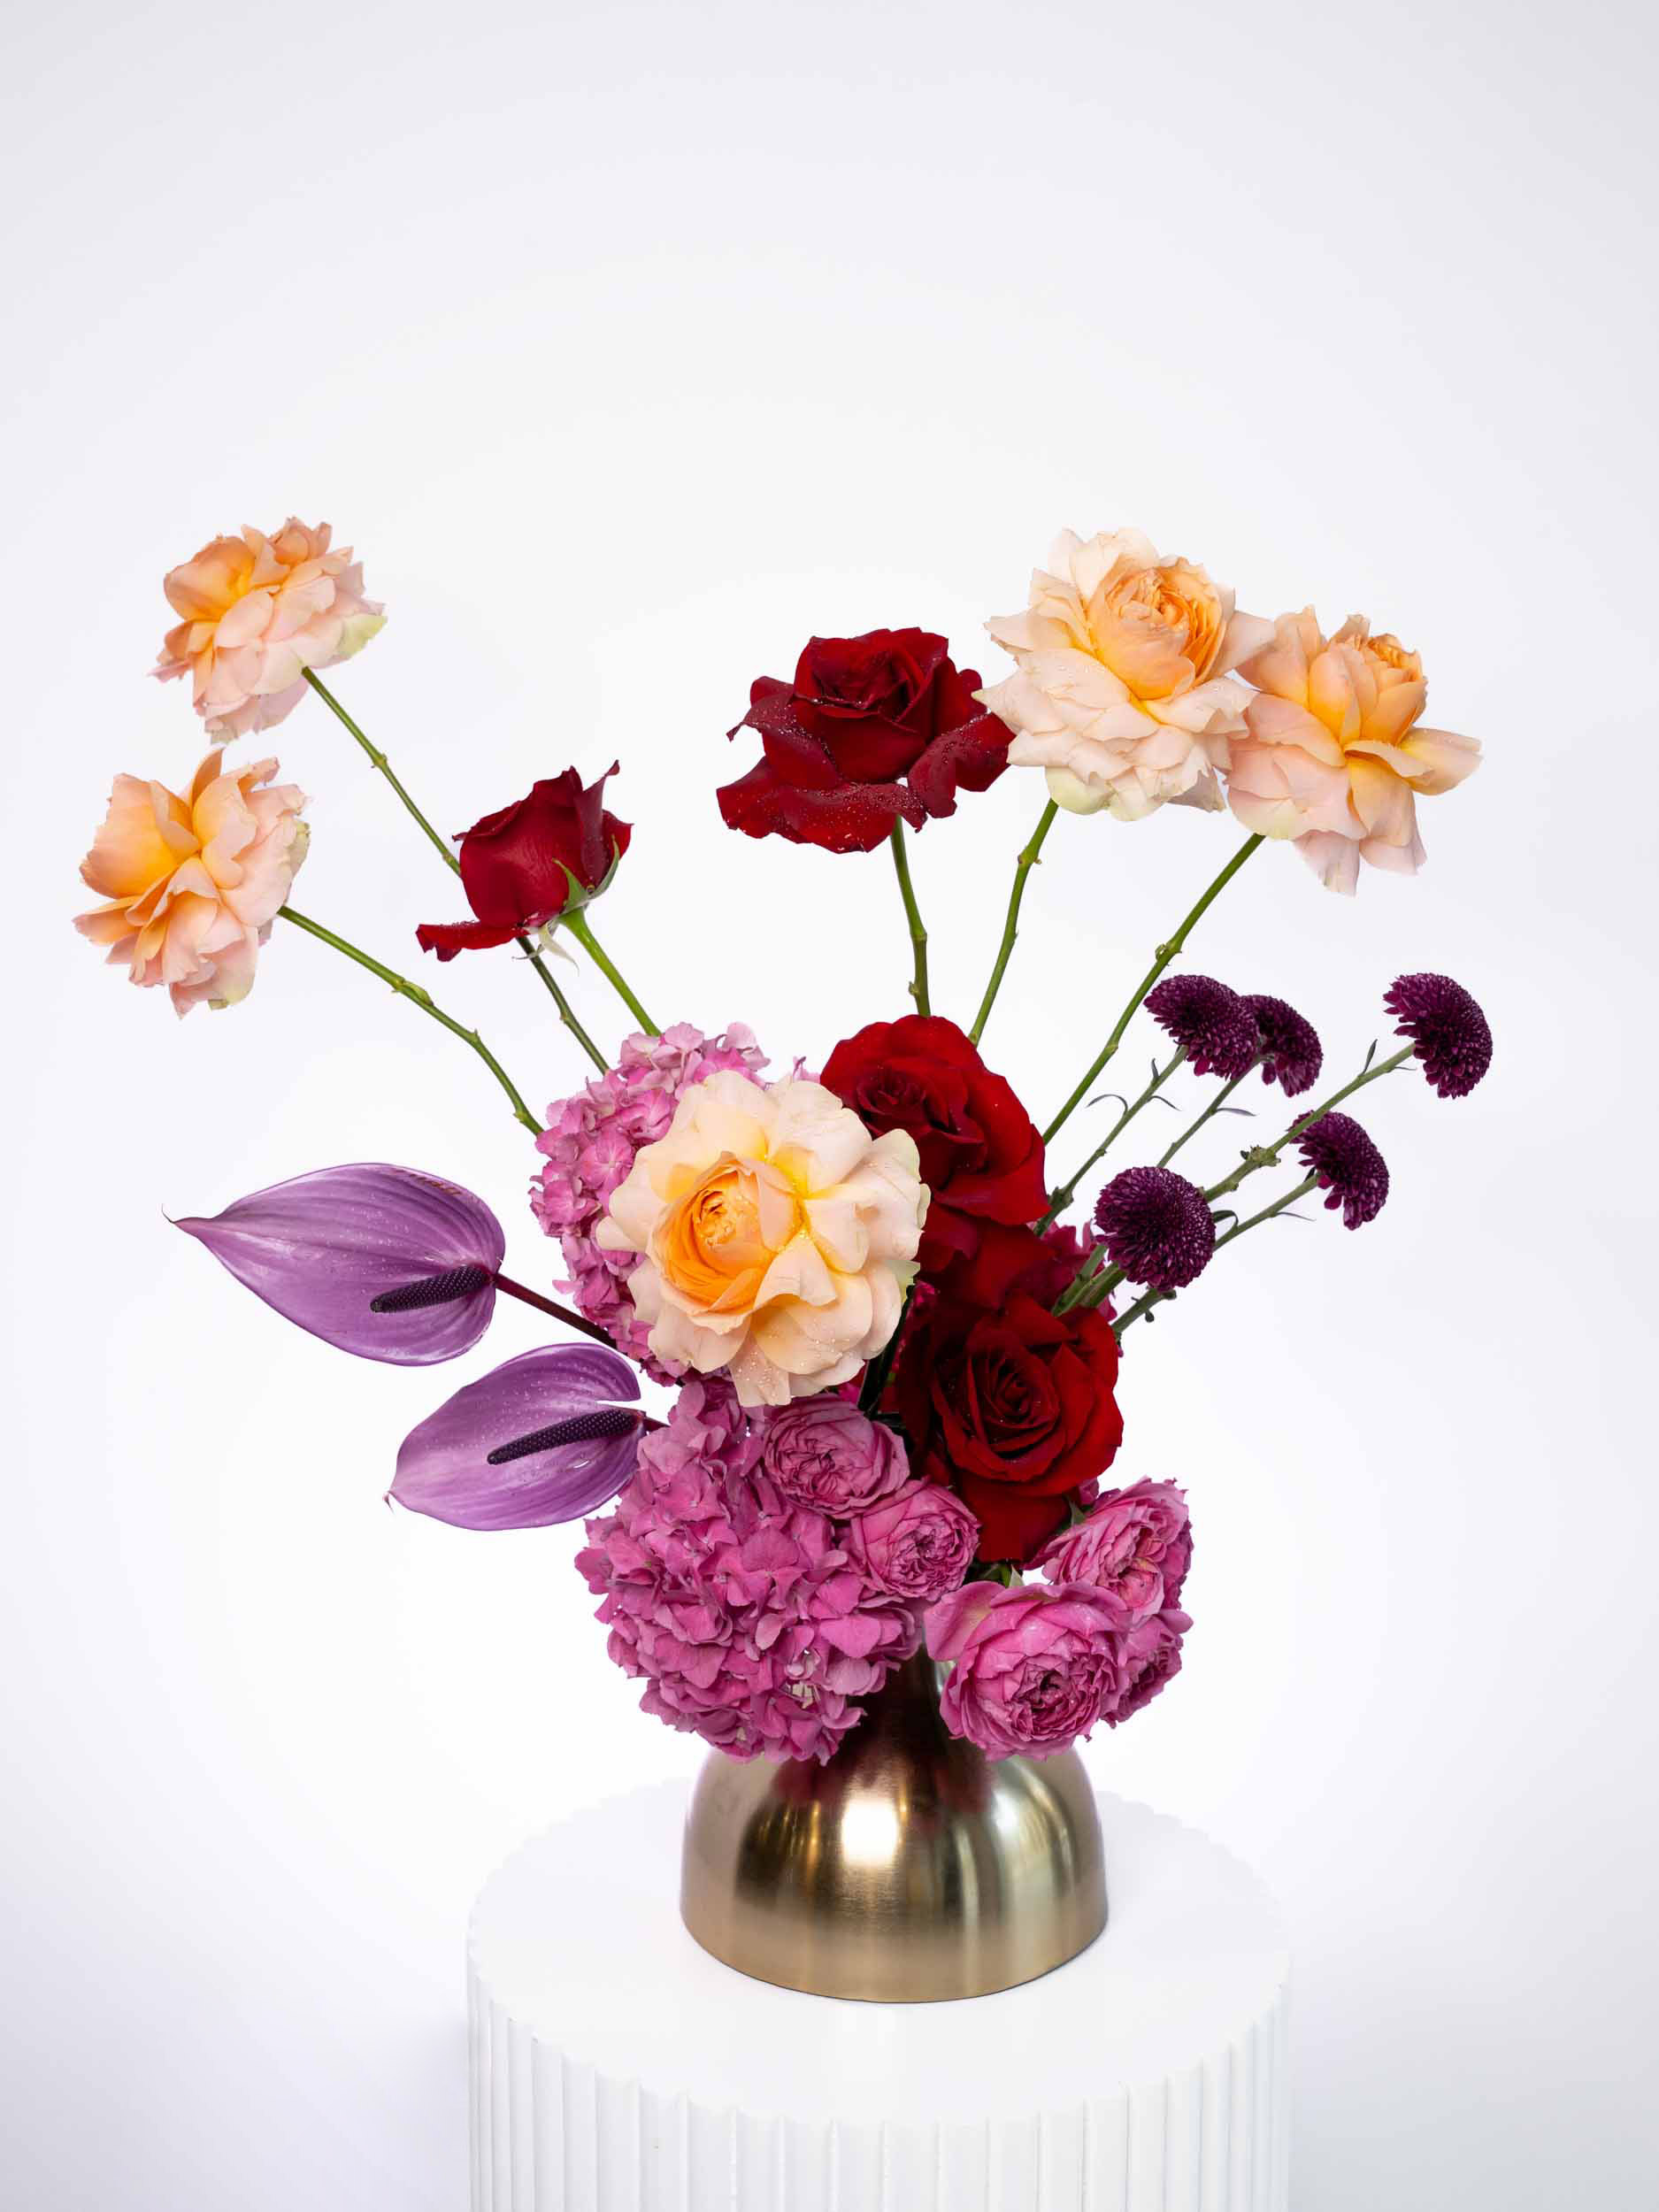 Ethereal beauty flowers arranged in a brass vase